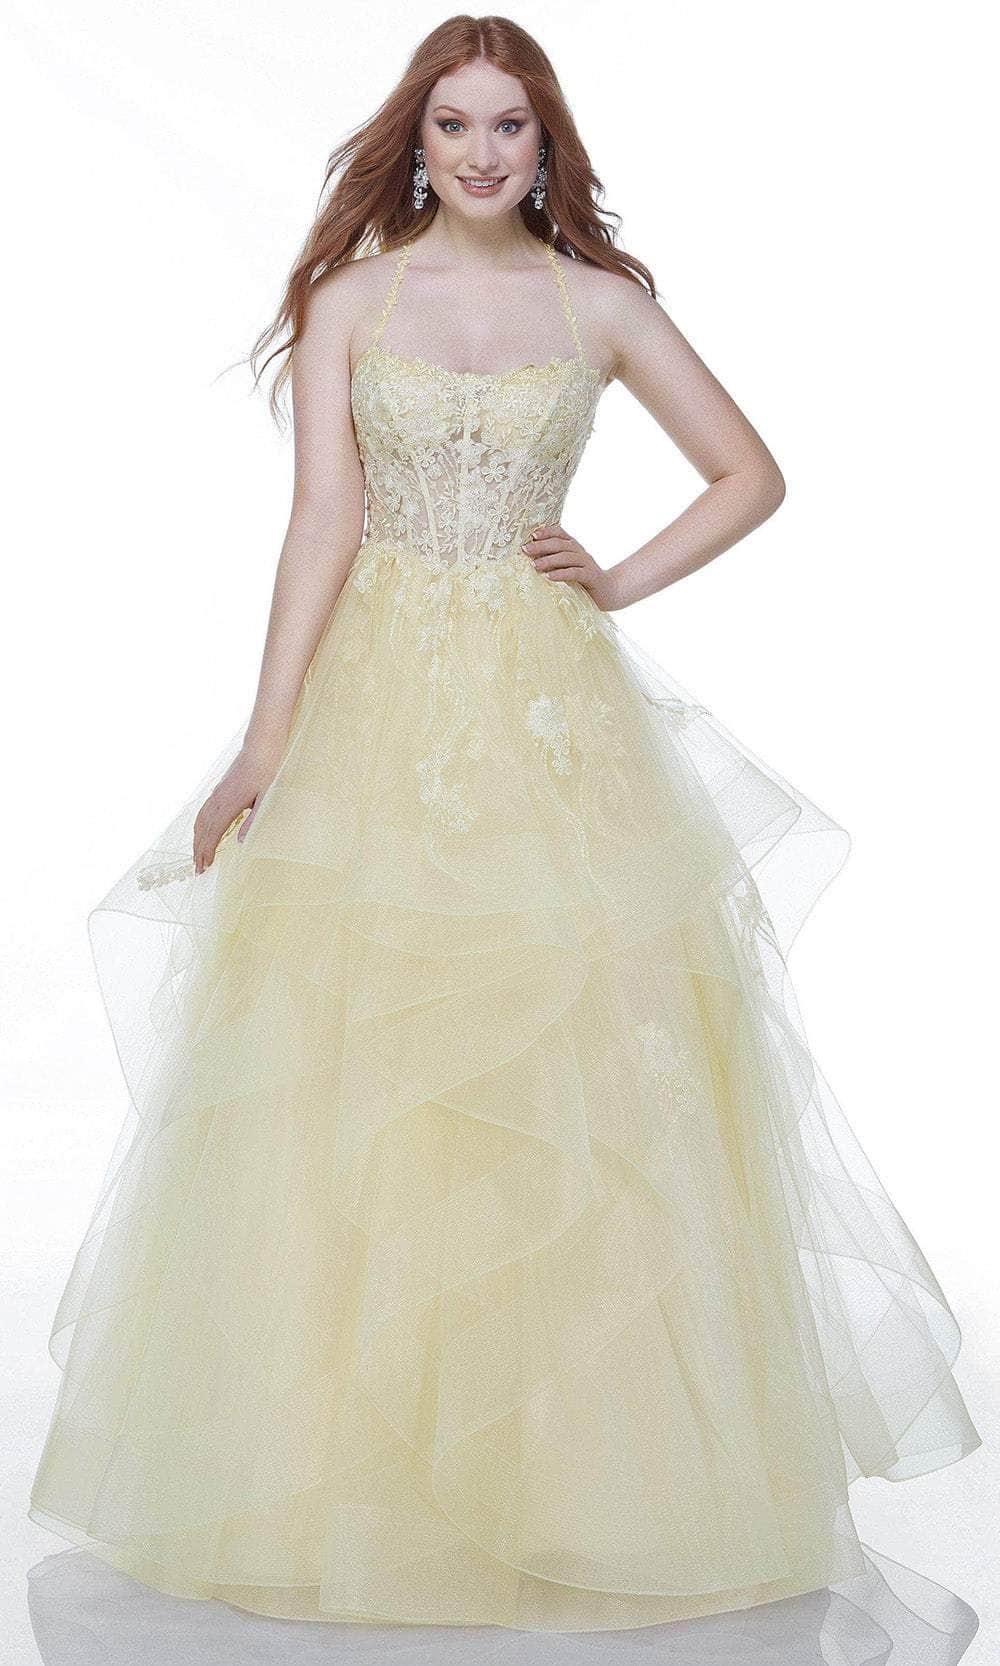 Alyce Paris 61094 - Embroidered Sweetheart Prom Ballgown Special Occasion Dress 000 / Light Yellow